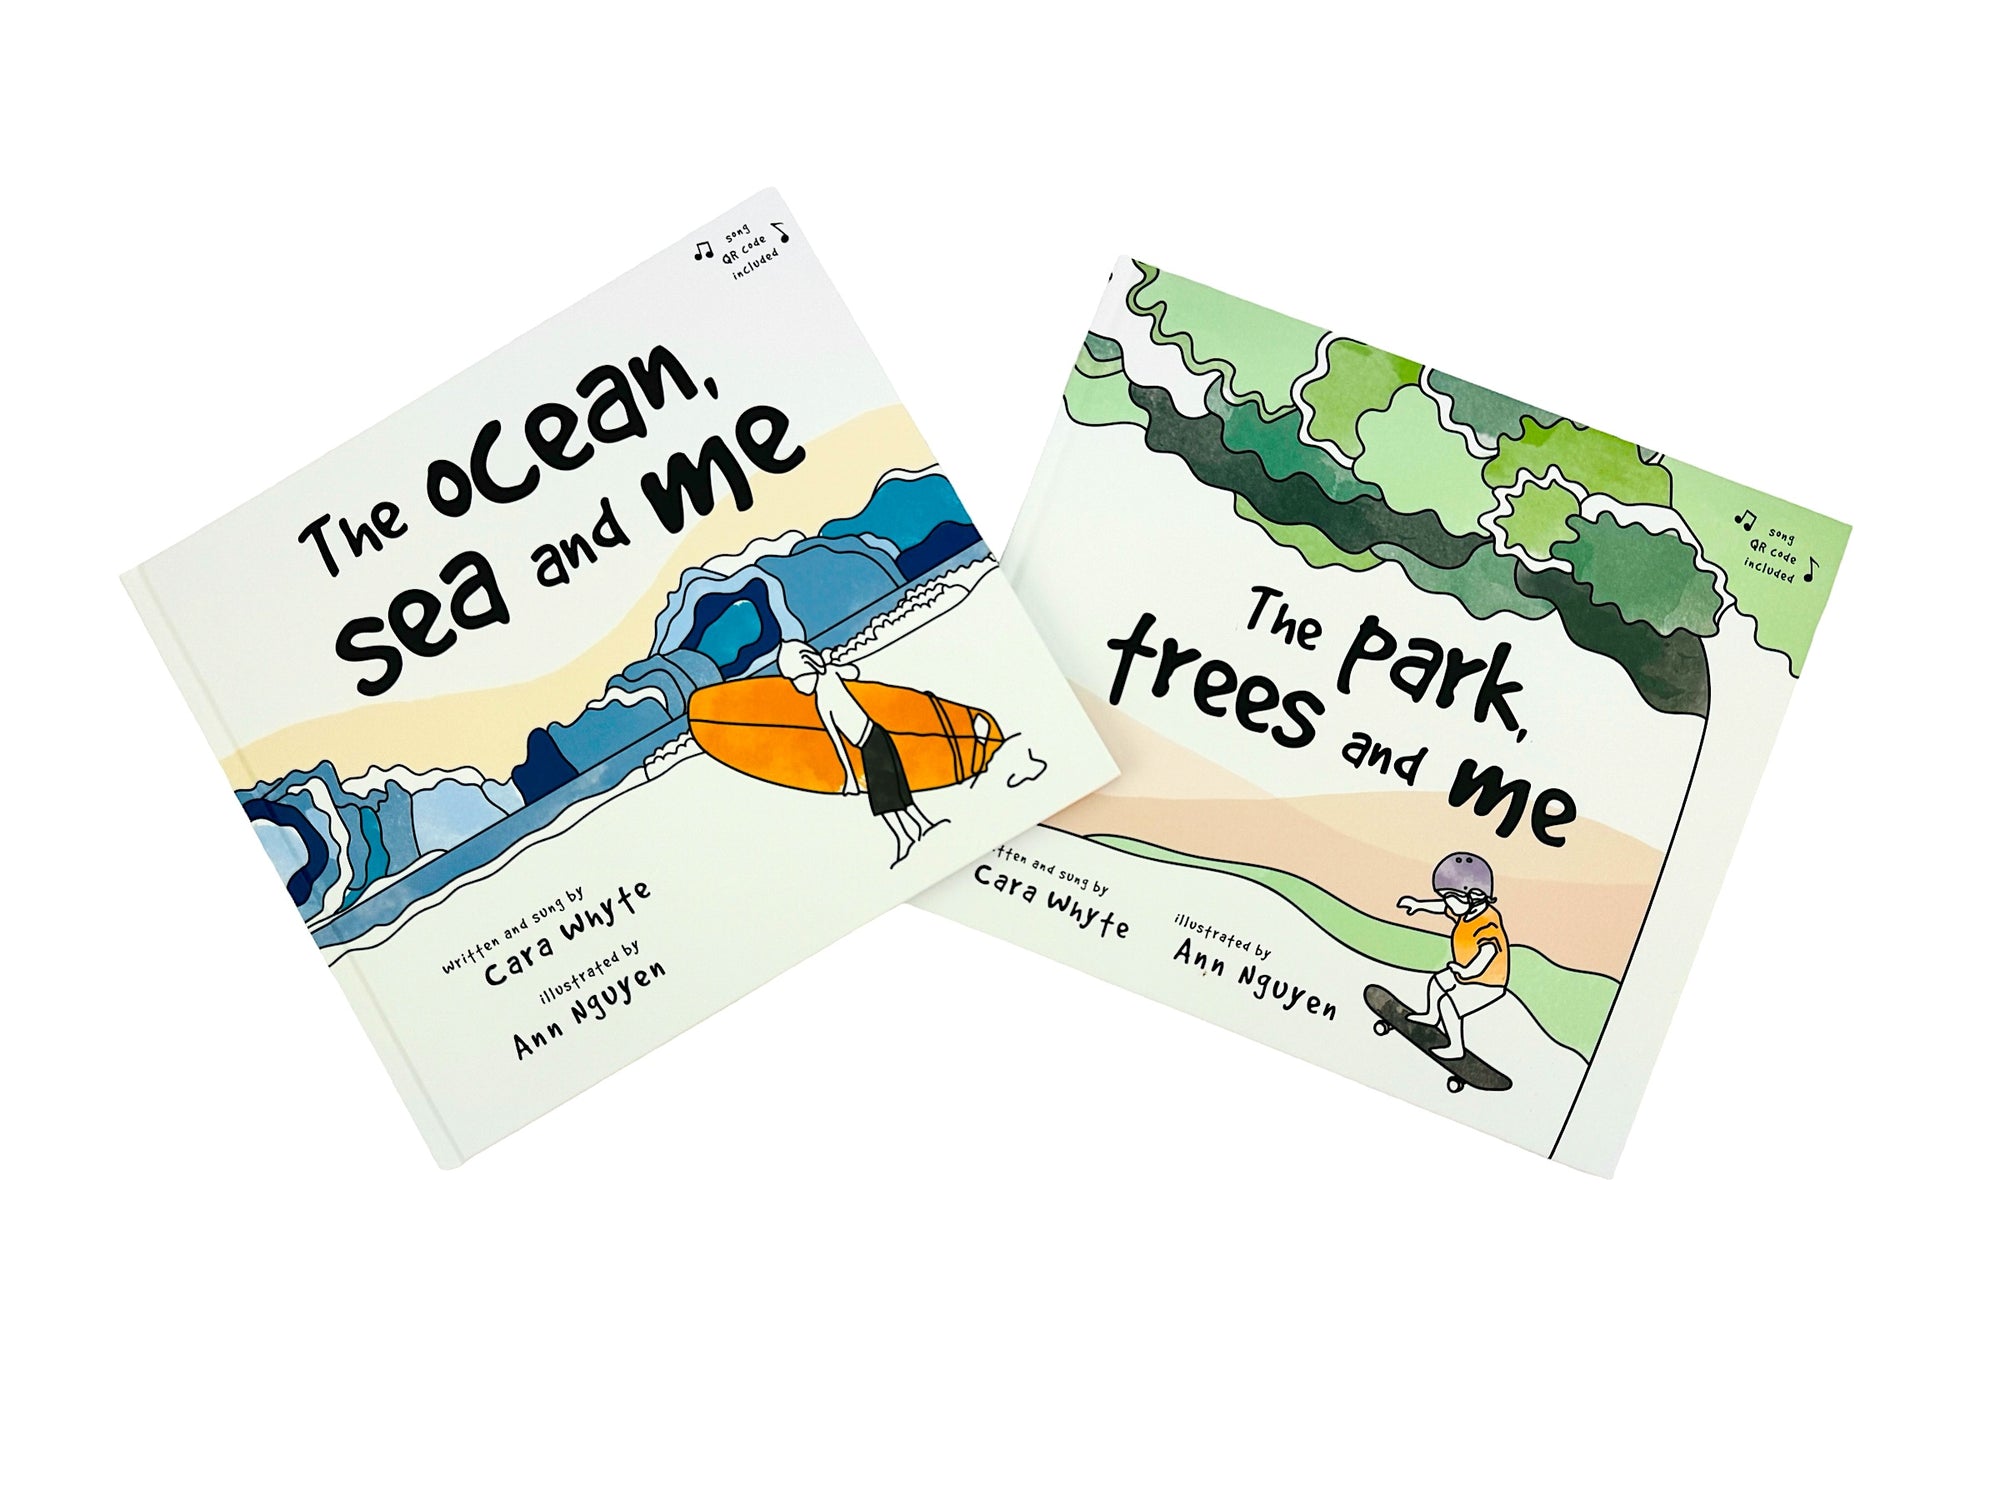 The two books, the park trees and me & the ocean, sea and me from the collection Cara and Ann Picture Book with Song